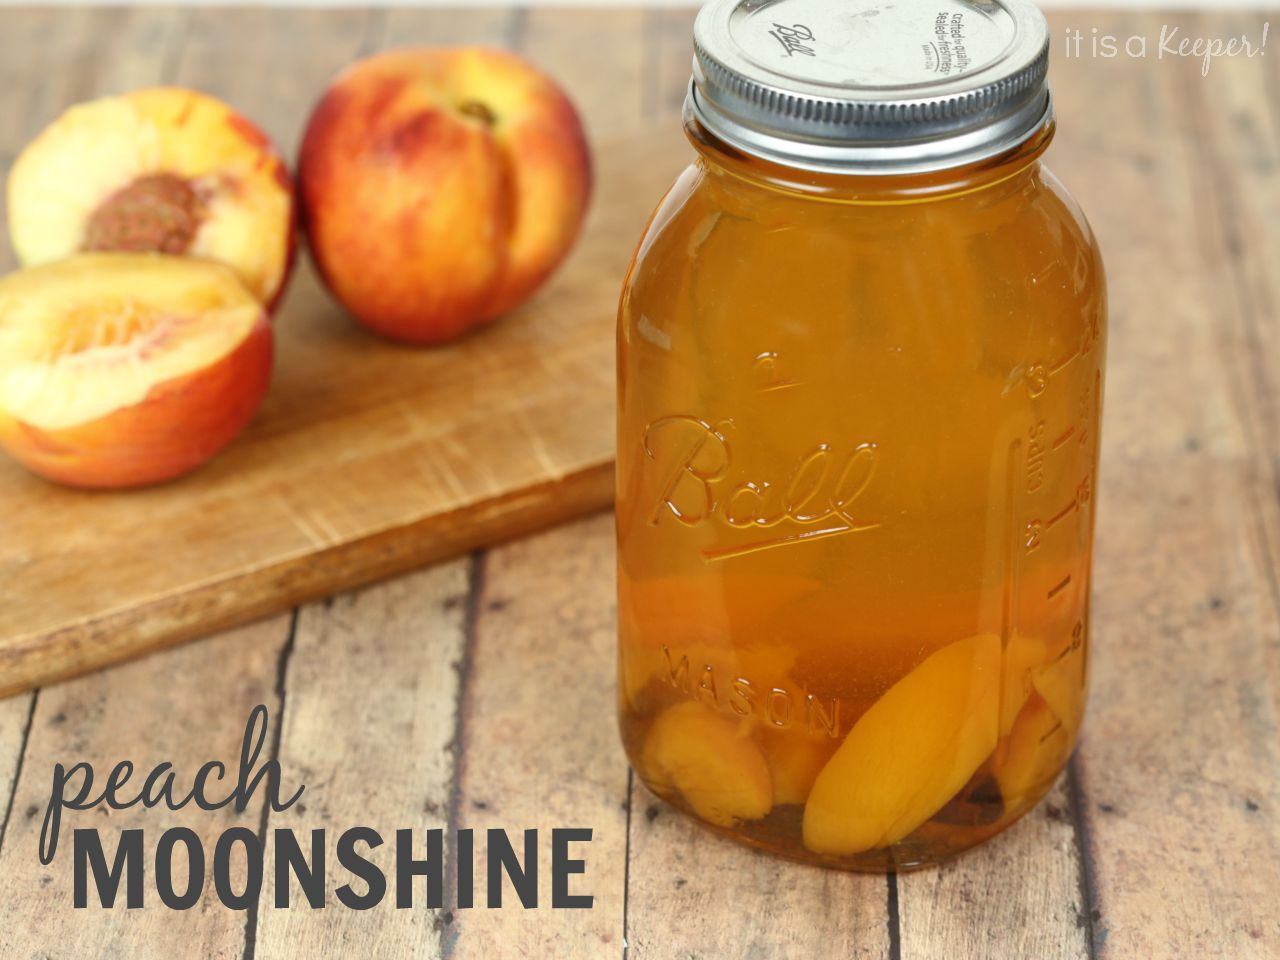 Apple Pie Moonshine Recipe With Everclear 151
 Peach Moonshine Recipe With Everclear 151 – Blog Dandk